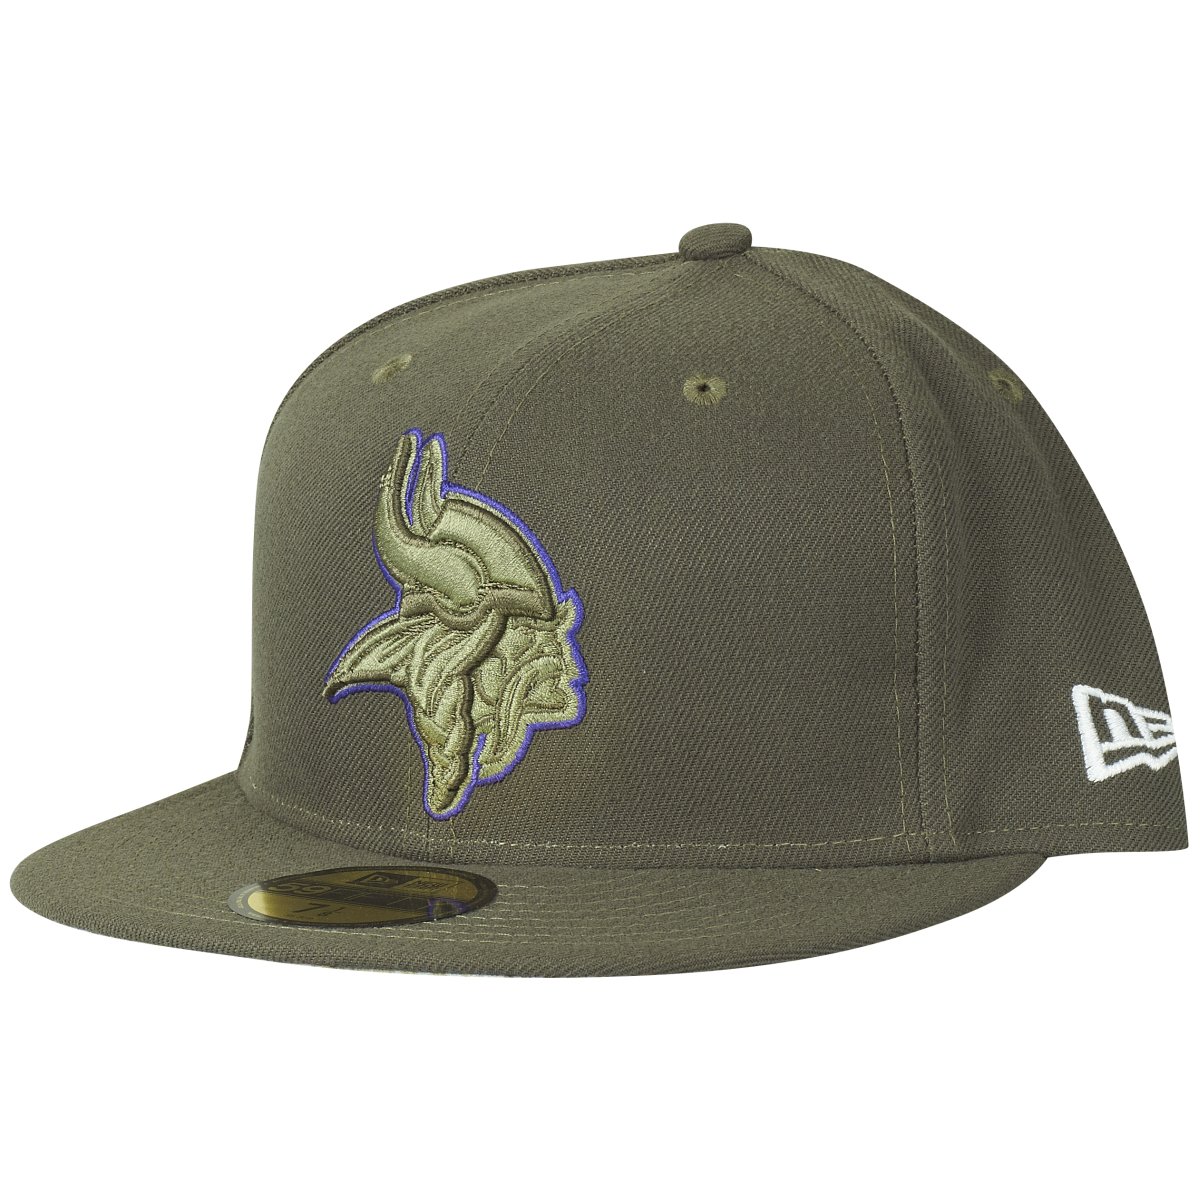 New Era 59Fifty Cap - Salute to Service Minnesota Vikings | Fitted ...